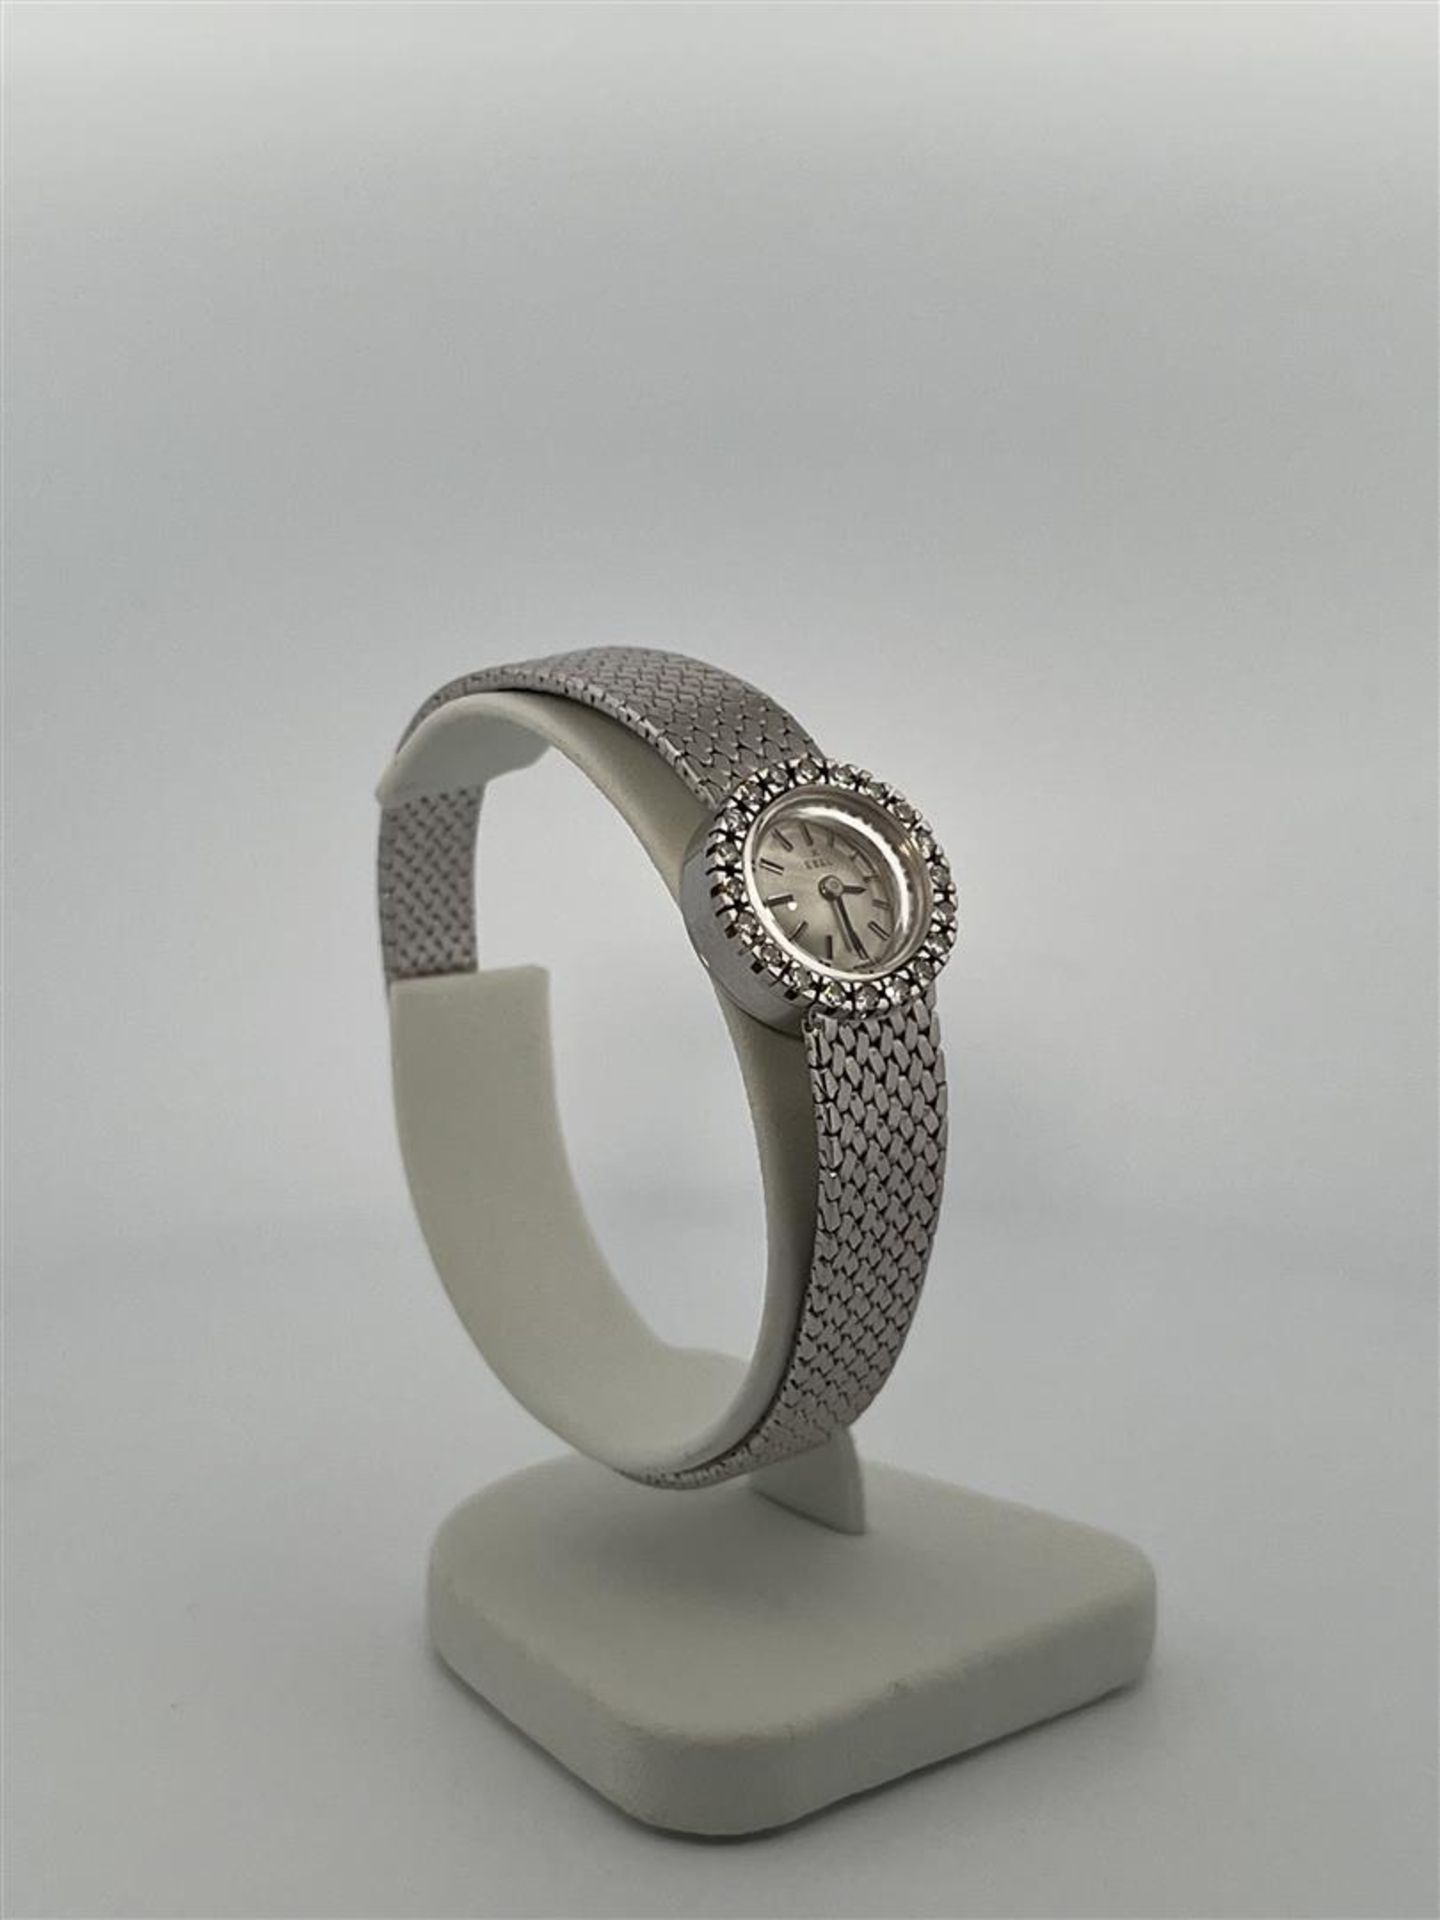 18kt white gold Ebel cocktail ladies watch set with diamonds. 
This watch is beautifully finished wi